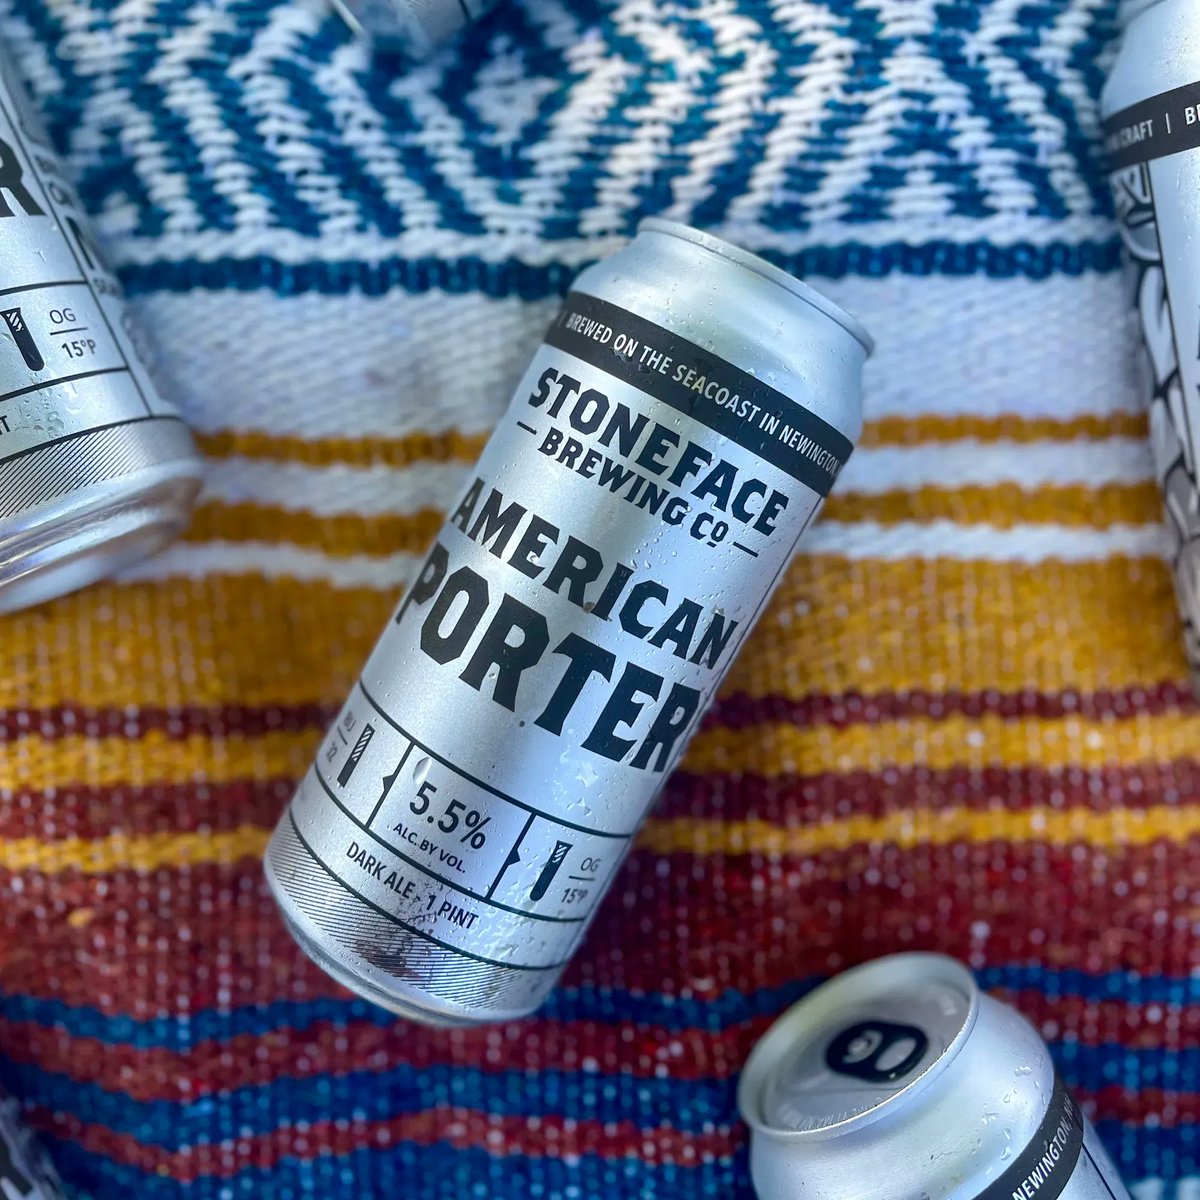 American Porter: Our robust porter utilizes a myriad of dark malts that impart coffee and chocolate notes. Medium bodied, balanced, with a dry finish. • 5.5% 
#NHbeer #americanporter